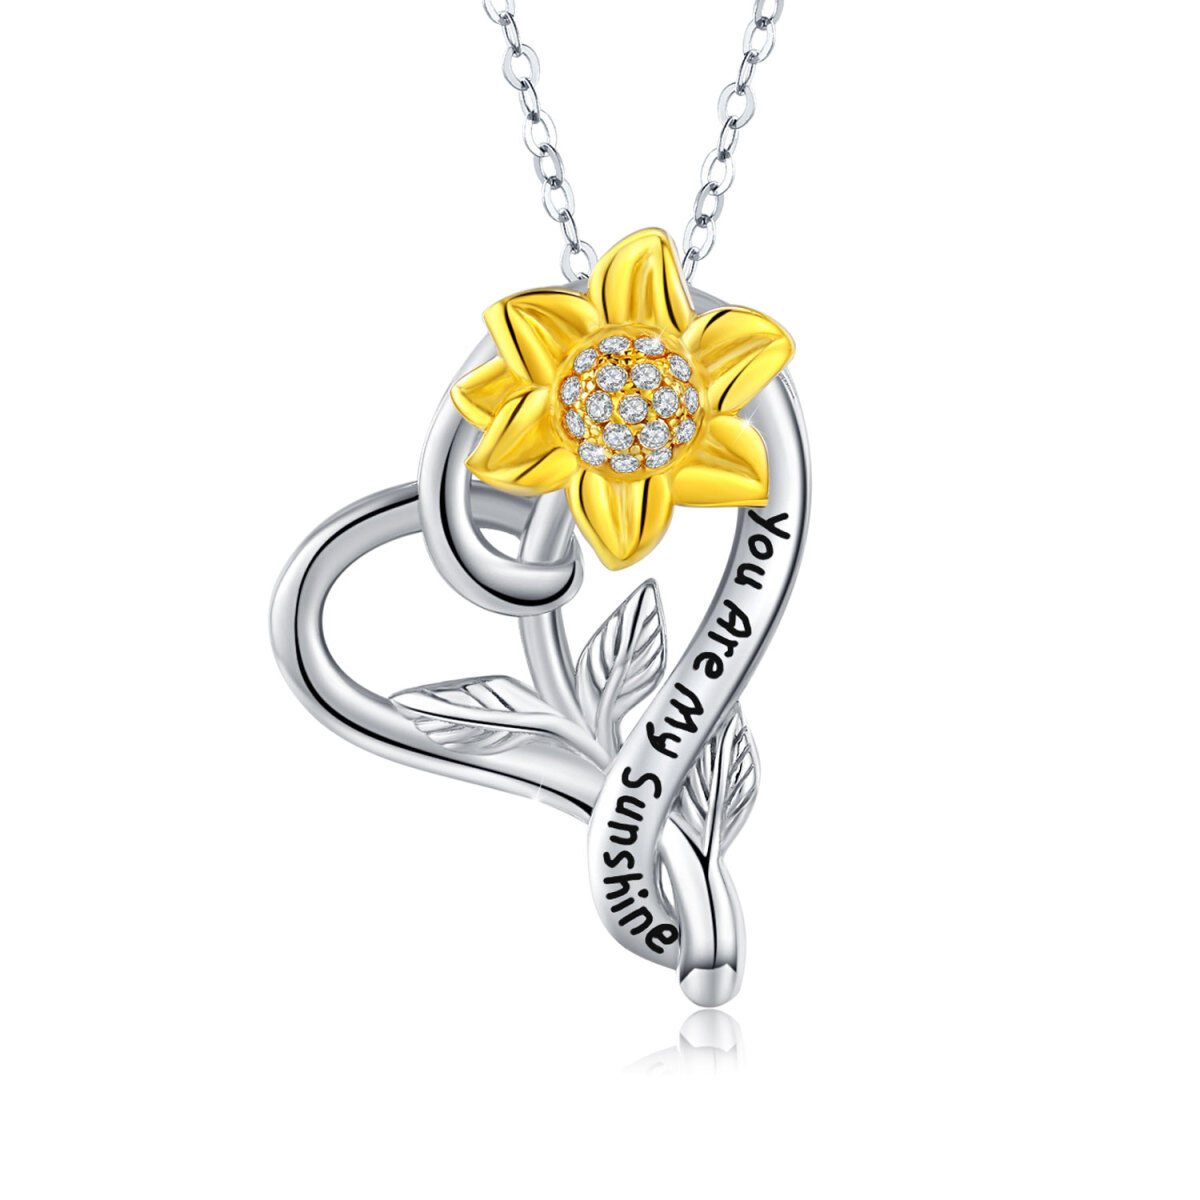 Sterling Silver Circular Shaped Cubic Zirconia Sunflower & Heart Pendant Necklace with Engraved Word-1